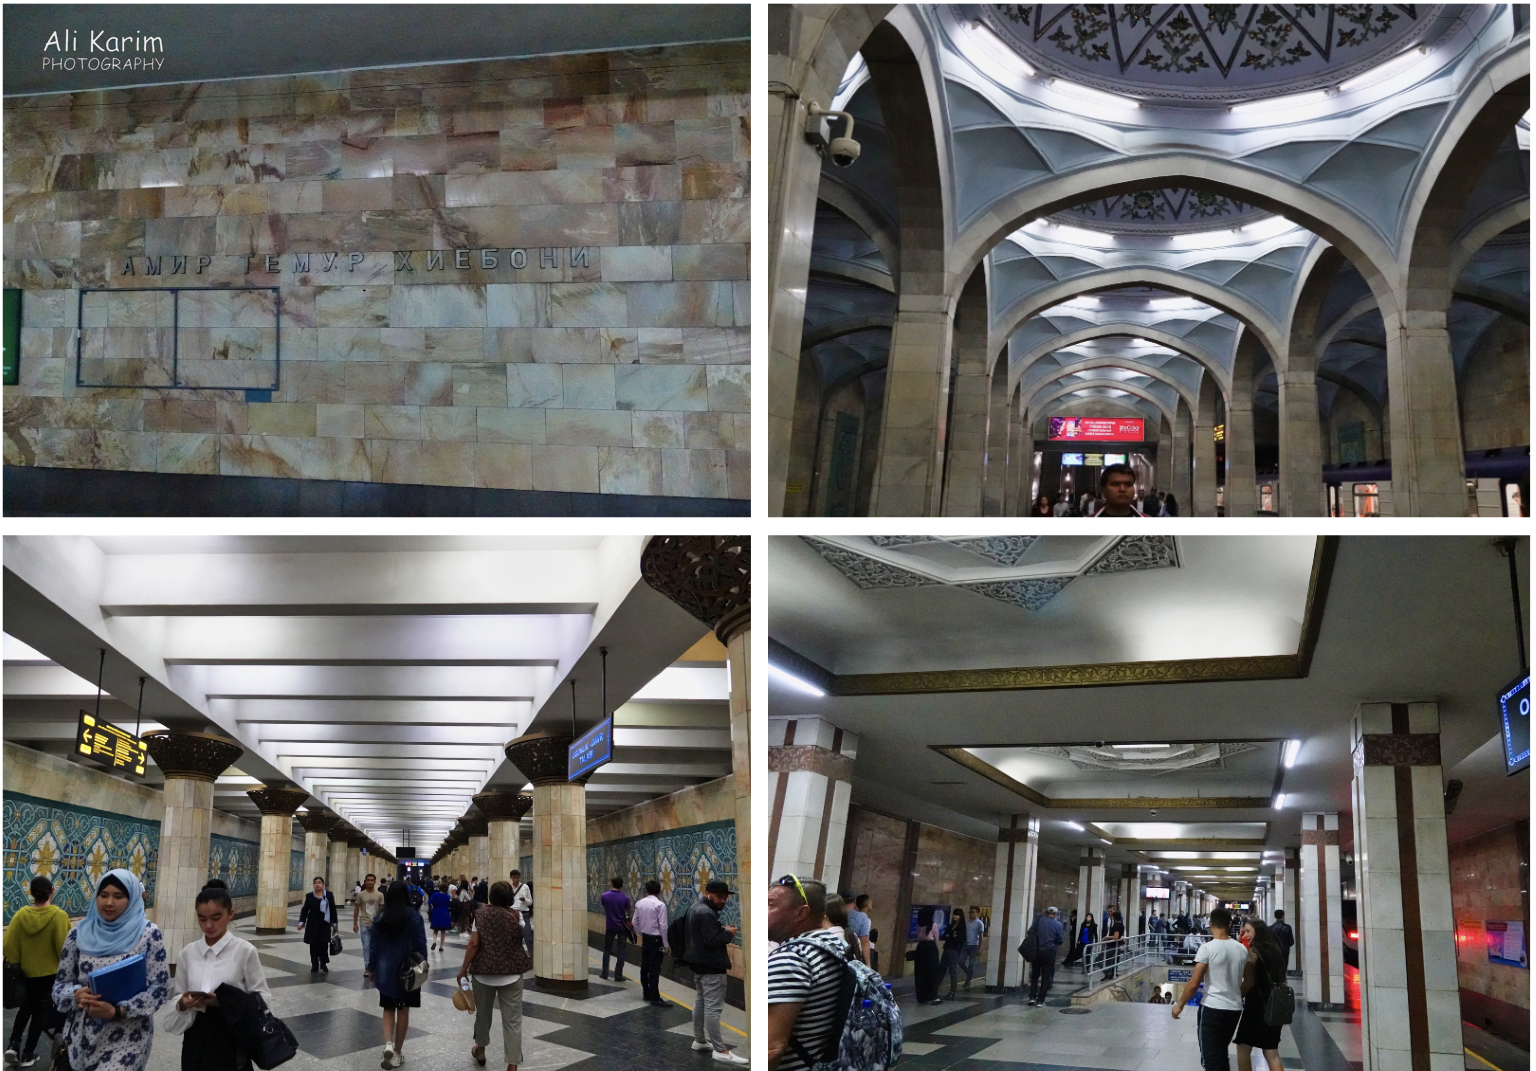 Tashkent, Oct 2019, Many people were using the subways, which were very clean, and each subway station was unique & had artistic domes, pillars and unique decor for the ceilings and walls